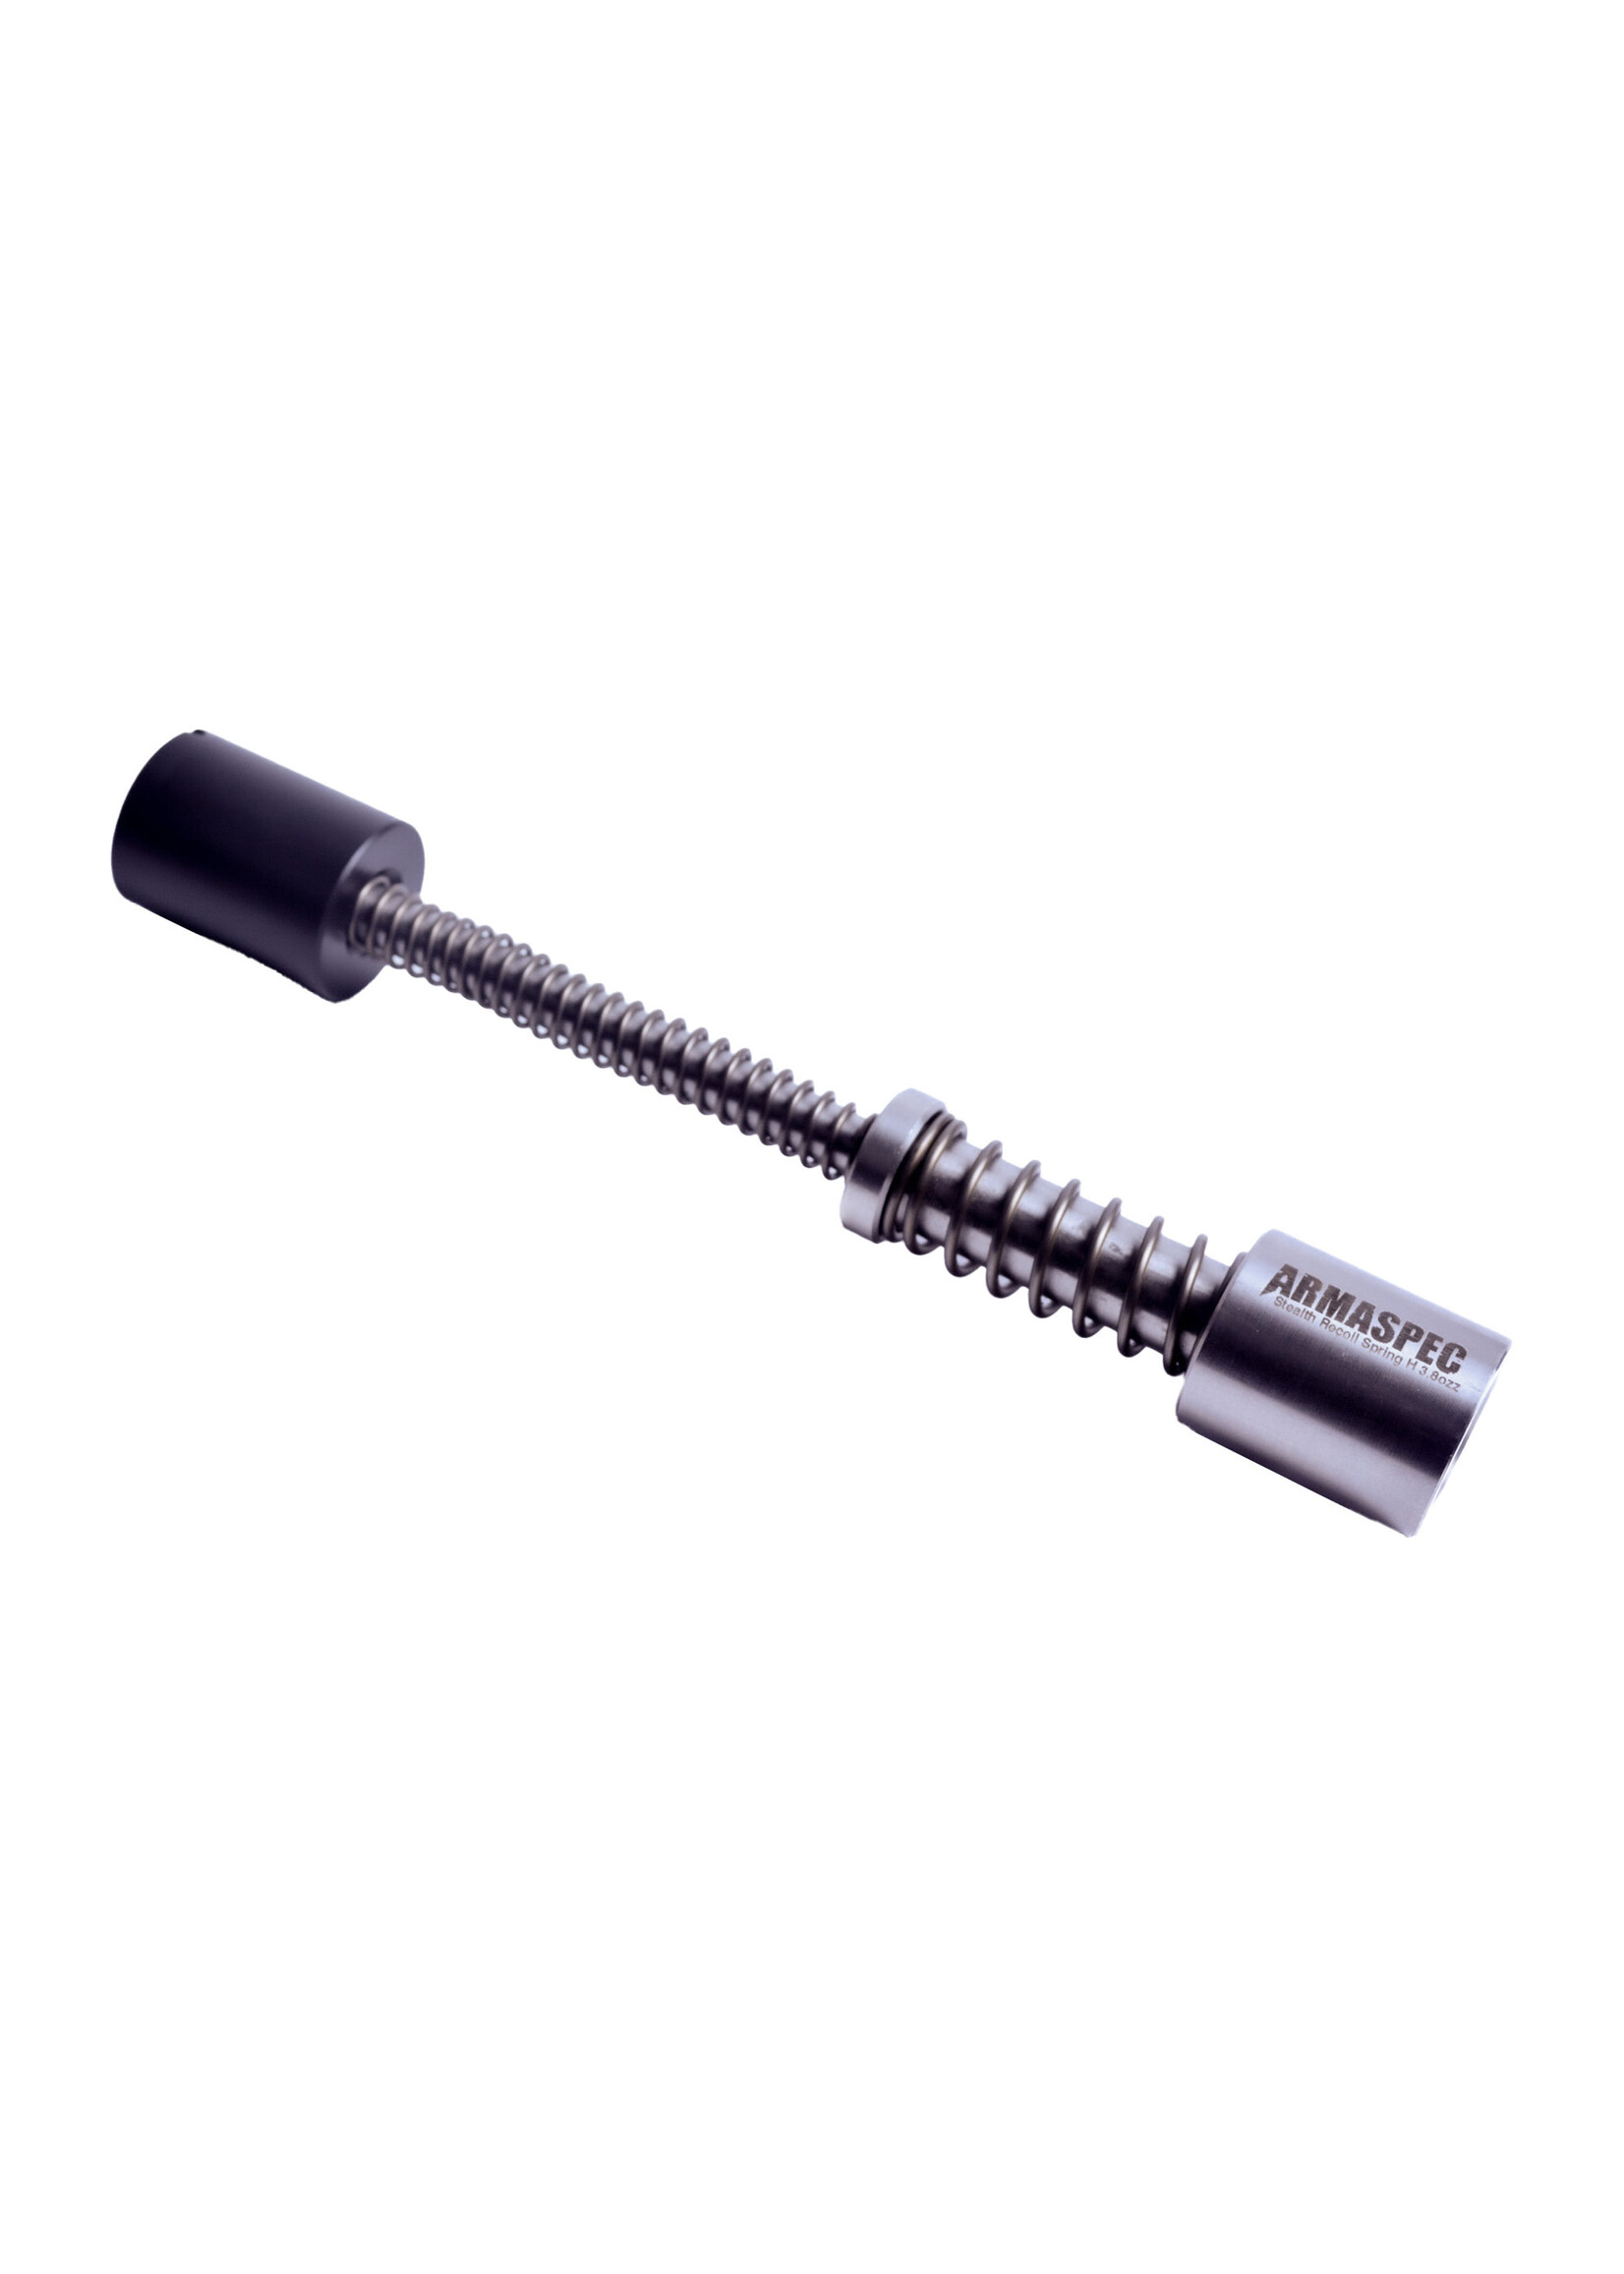 Armaspec Armaspec, Stealth Recoil Spring, SRS-H, 3.8oz, Black, Replacement For Standard Buffer and Spring